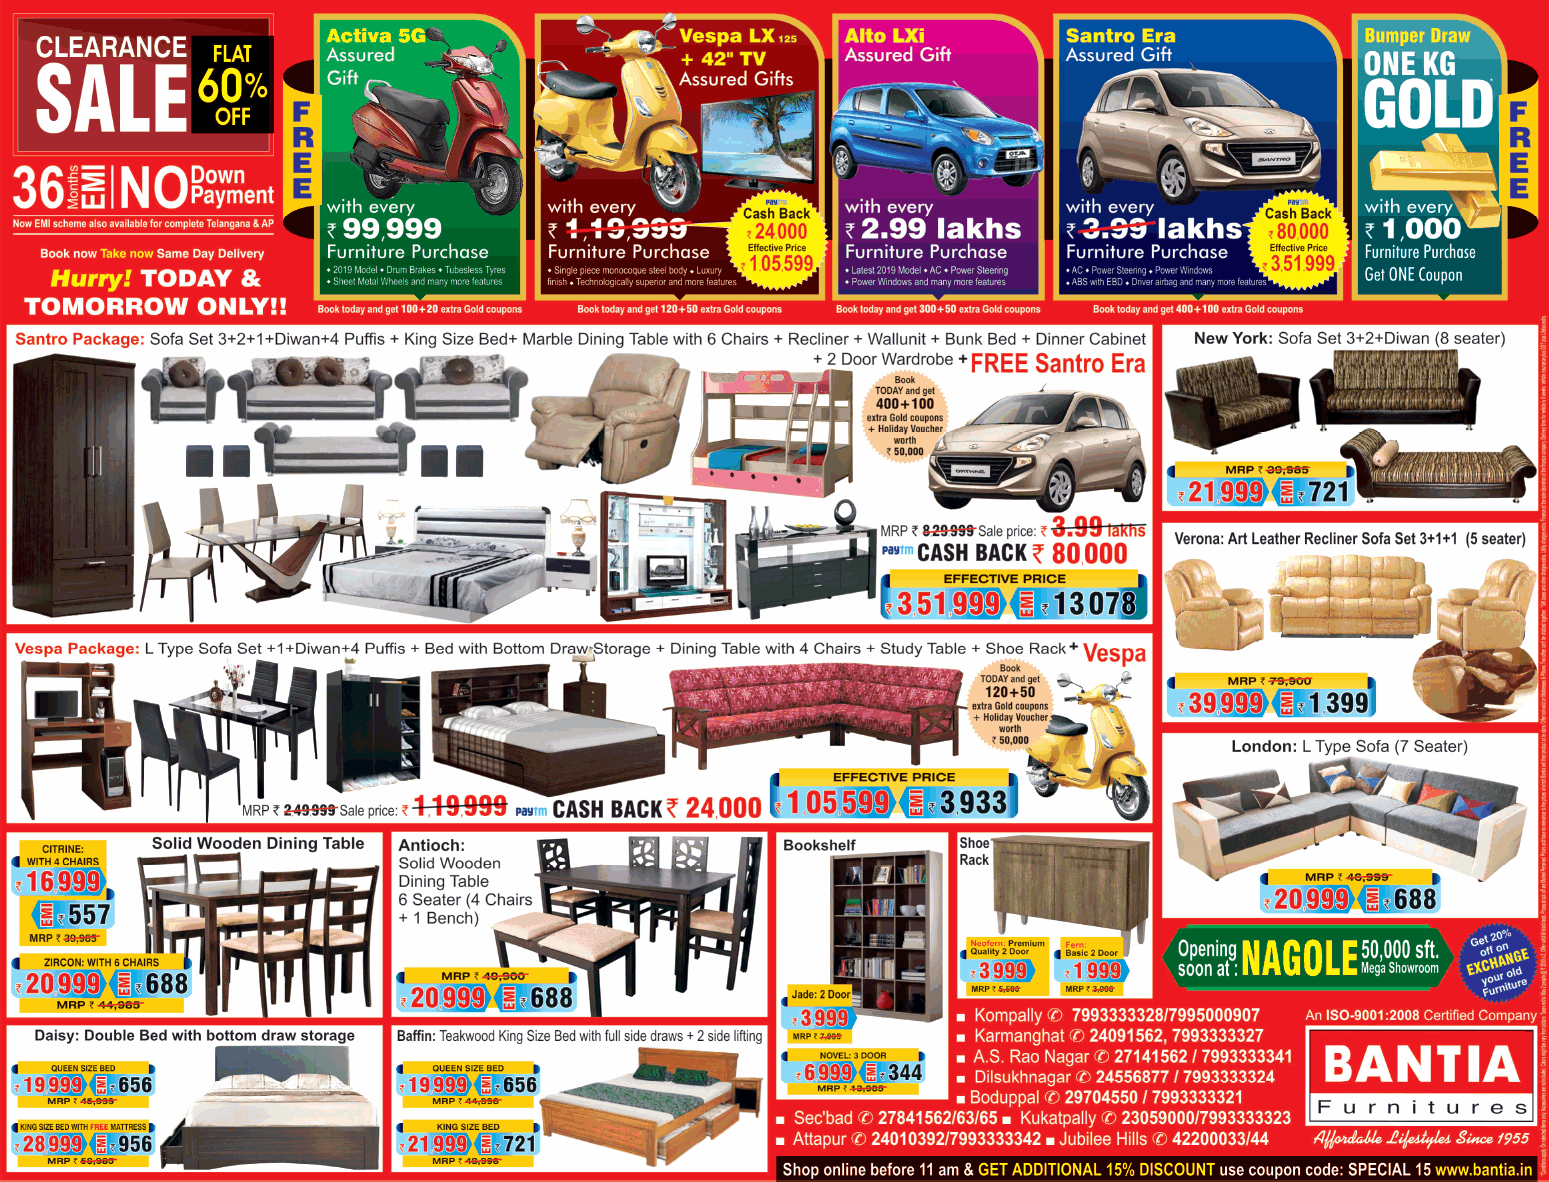 bantia-furniture-clearance-sale-flat-60%-off-ad-times-of-india-hyderabad-17-02-2019.png